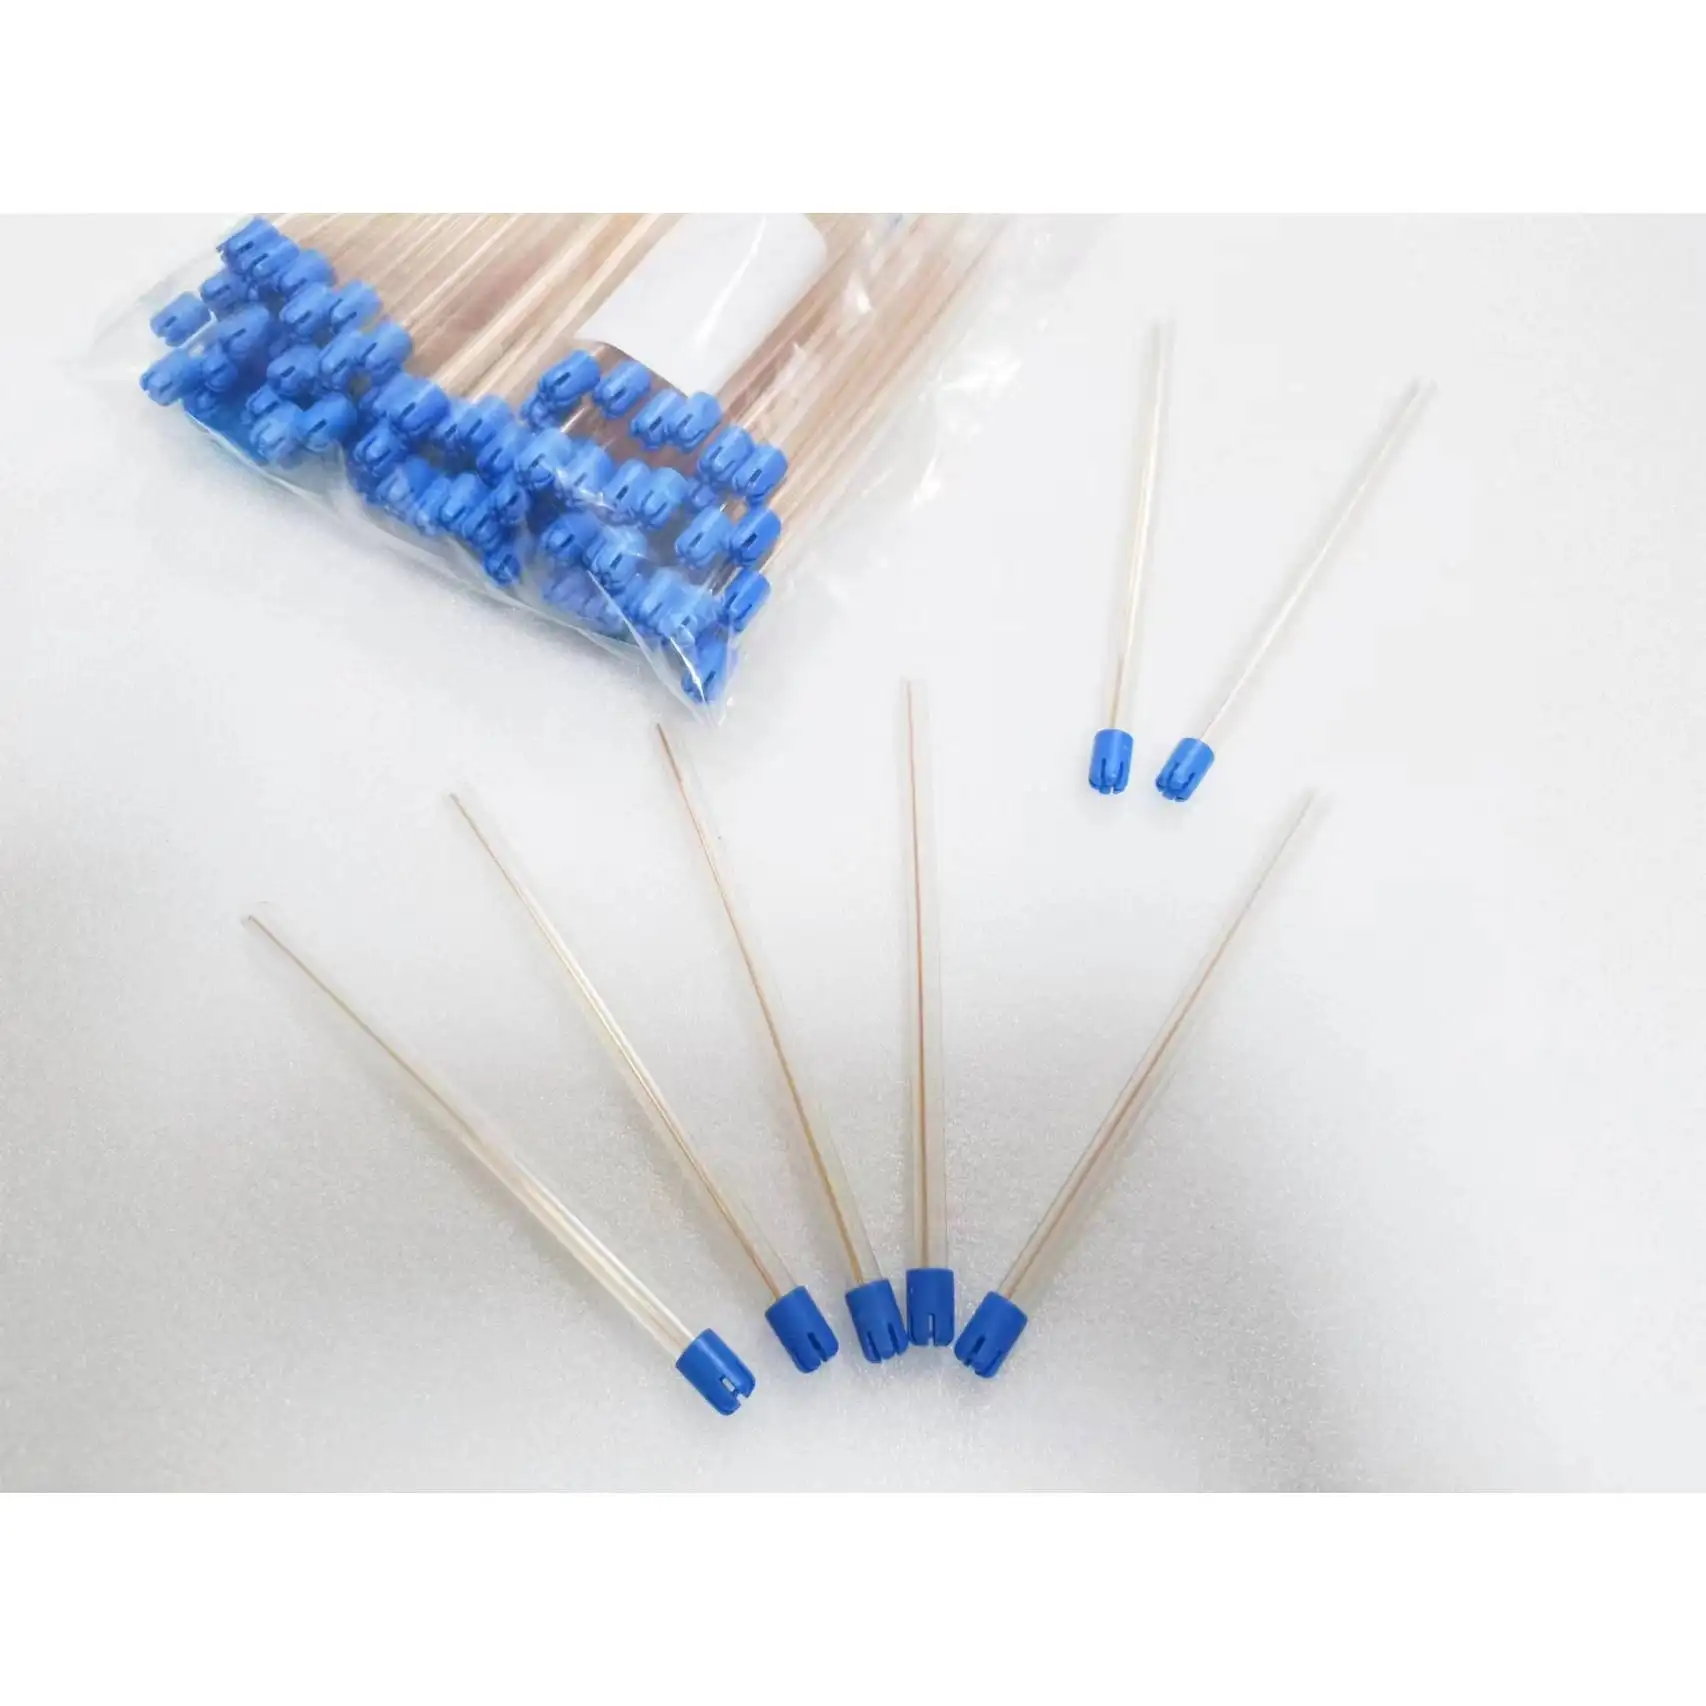 Medical Disposable Dental Suction Saliva Ejectors Dental consumable